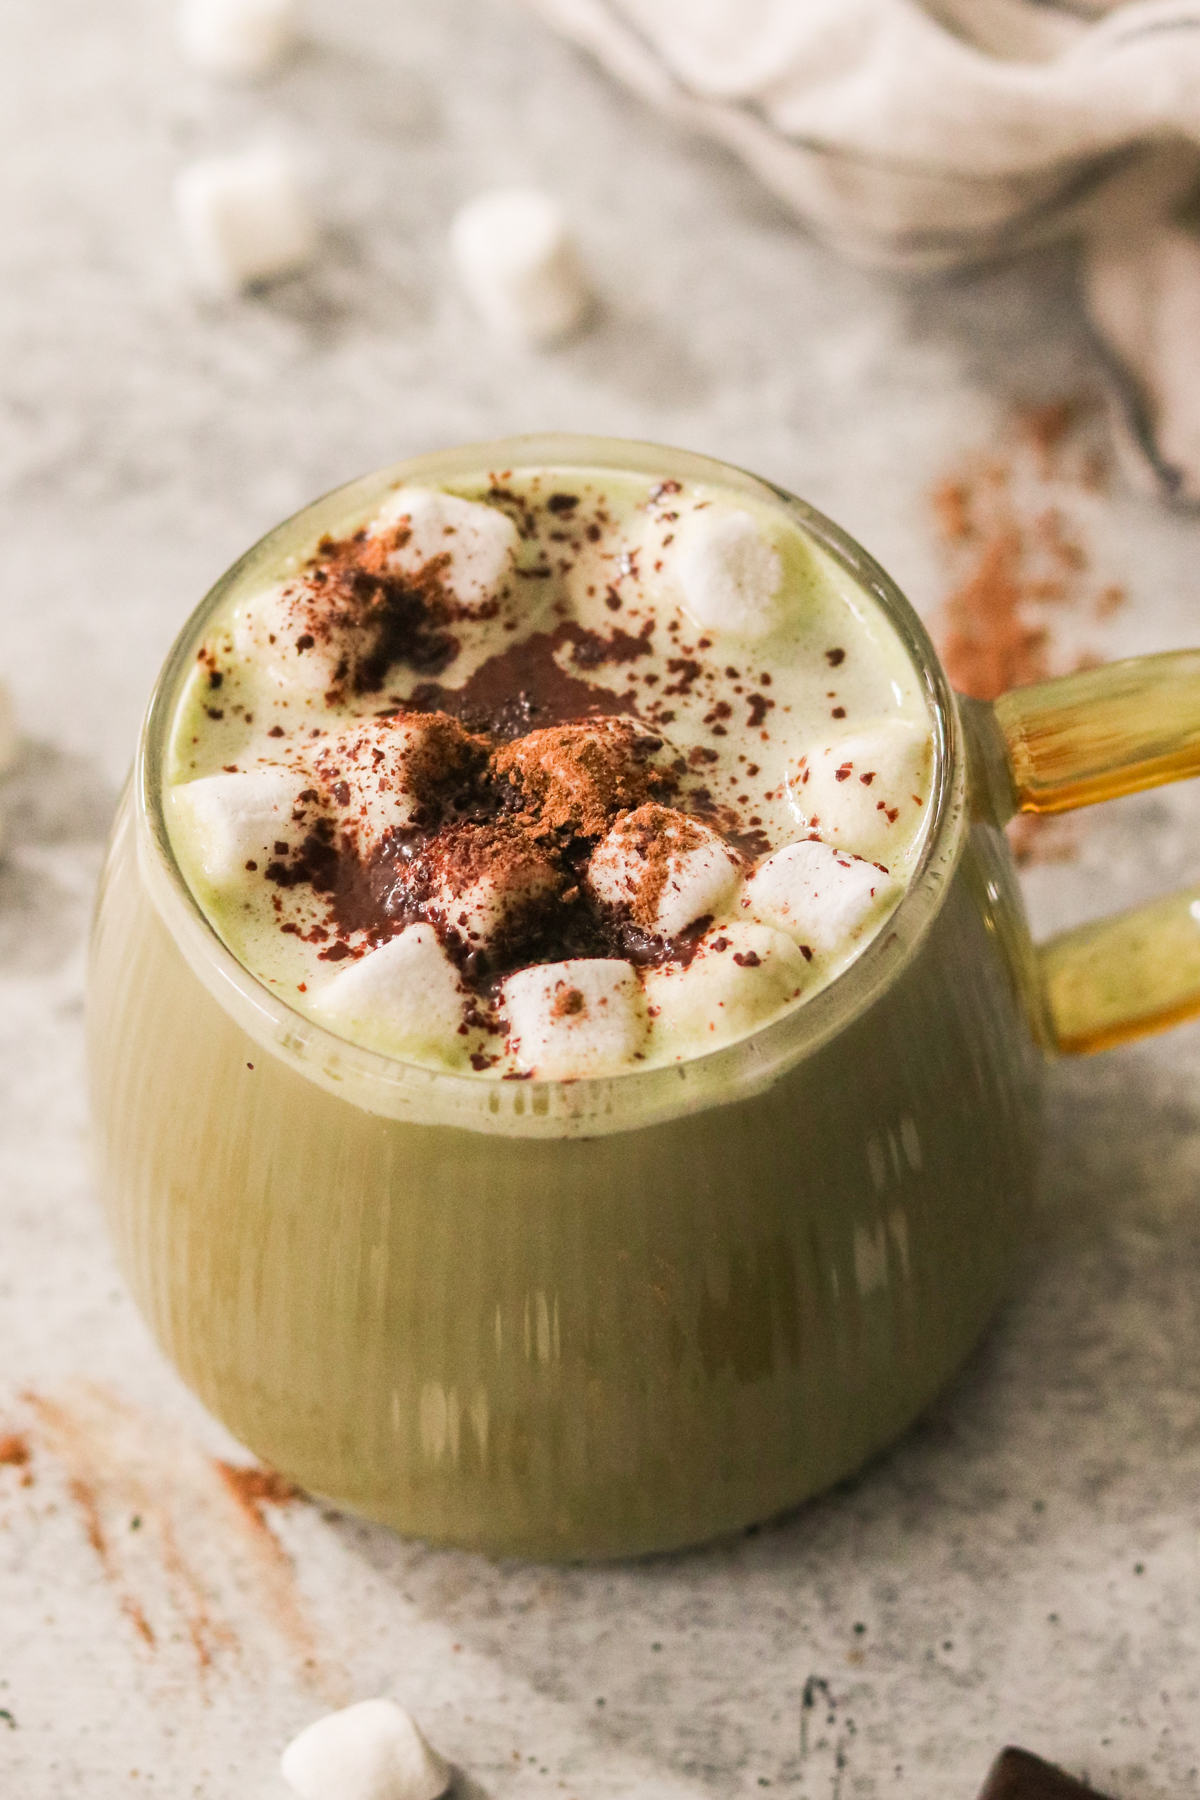 a glass mug filled with hot chocolate matcha and topped with marshmallows, and cinnamon